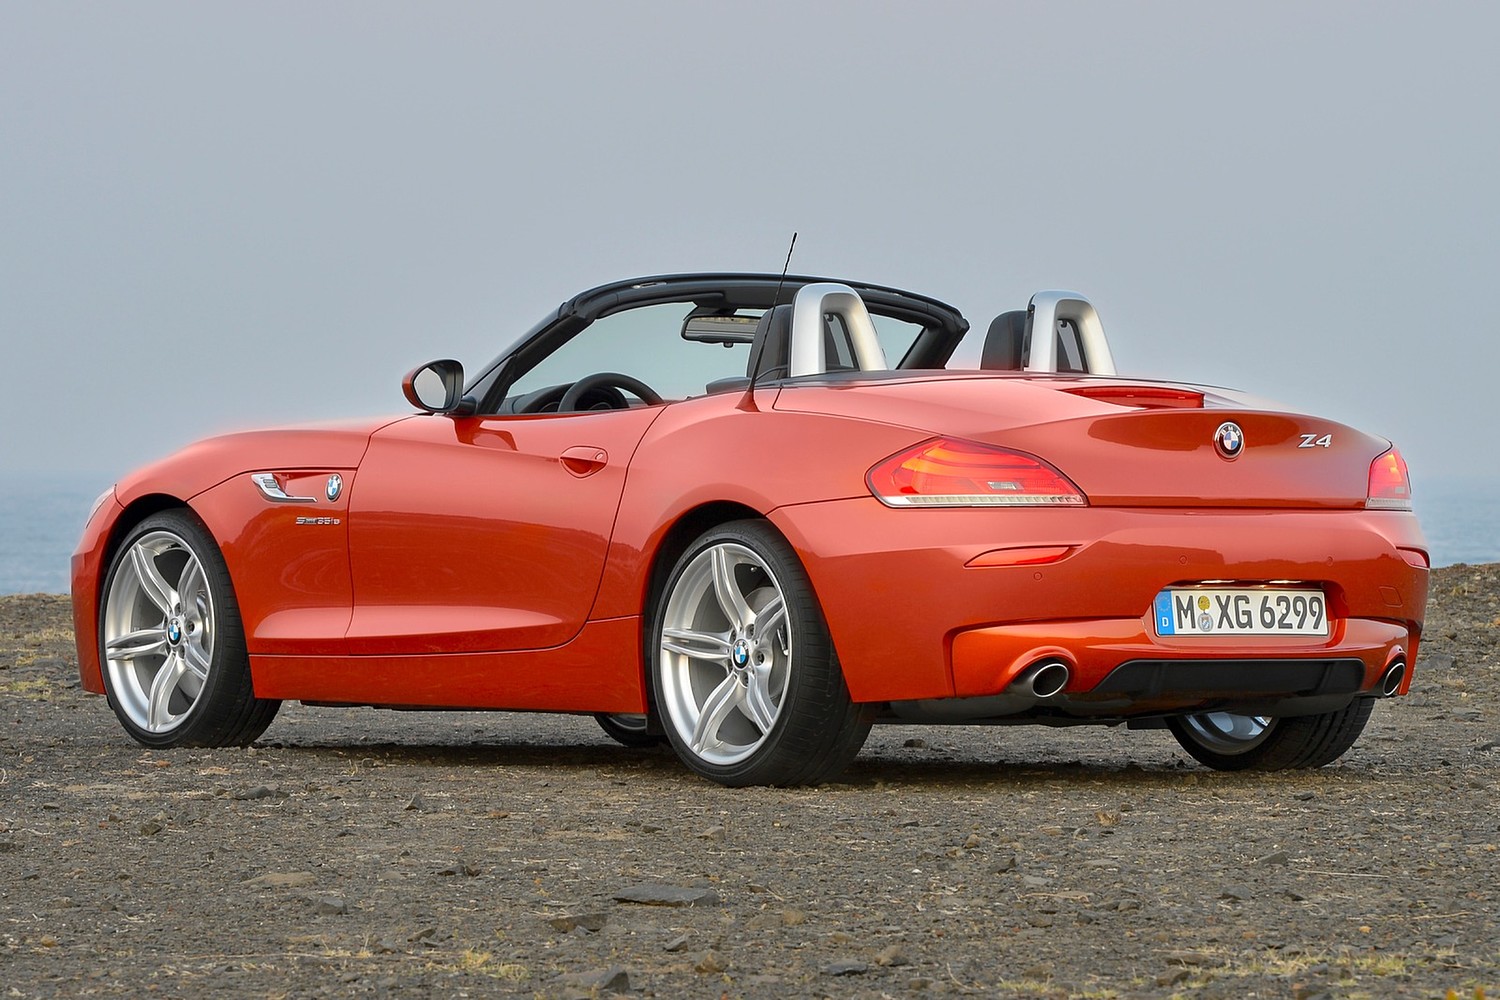 BMW Z4 sDrive35is Convertible Exterior (2015 model year shown)